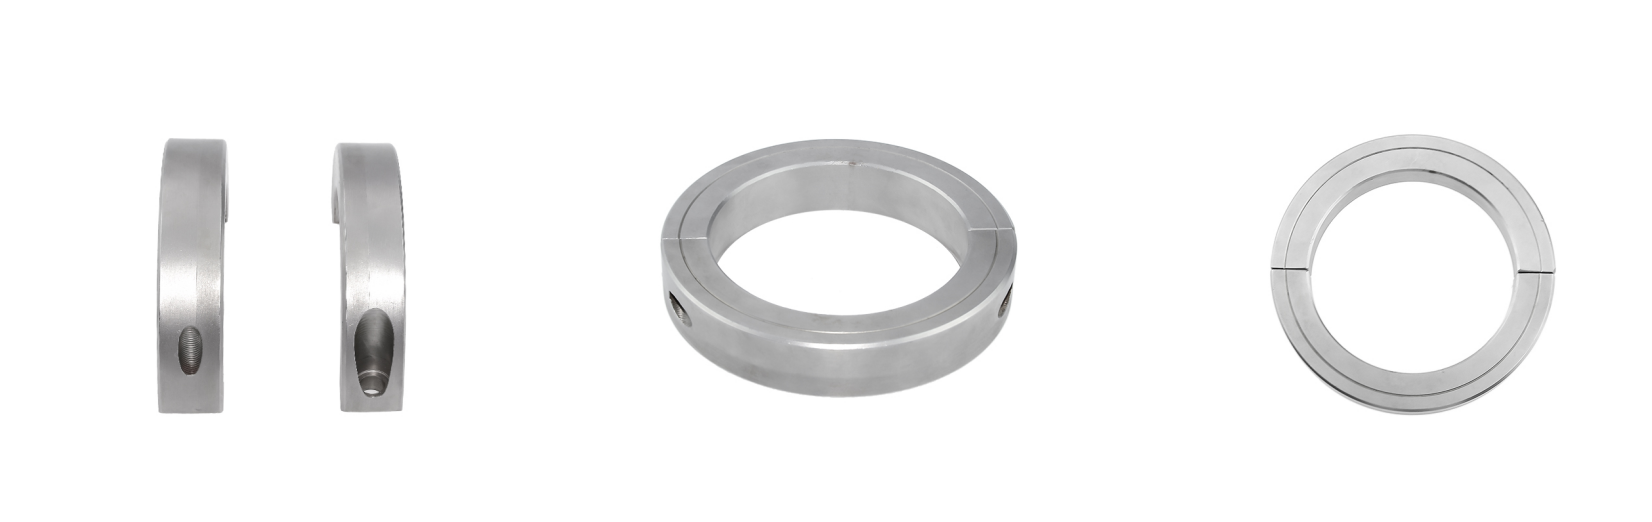 Aluminum alloy separation type fixed ring optical axis fixed Shaft Collars